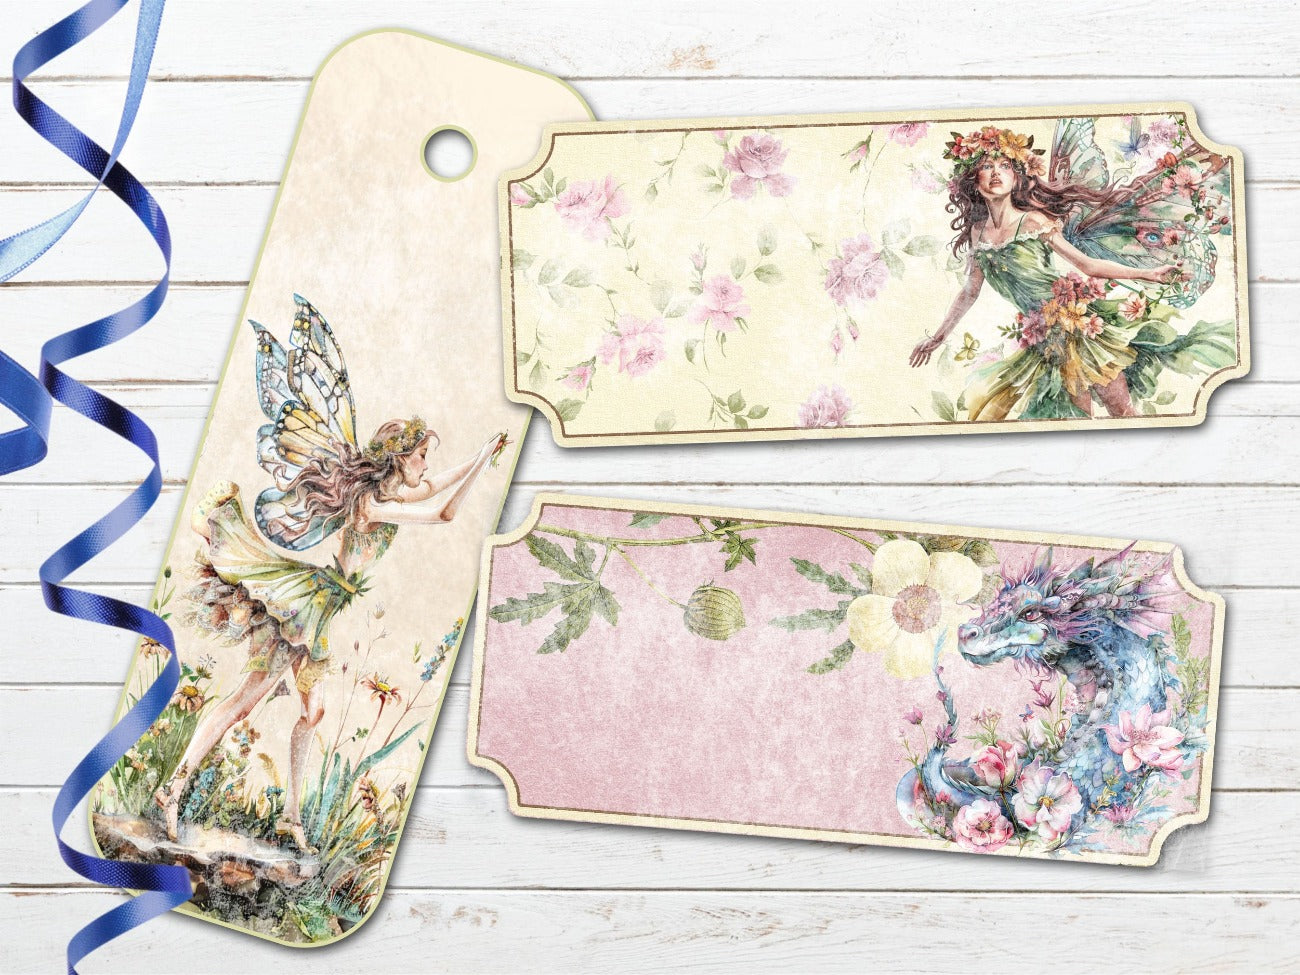 BELTANE LABELS, 3 Oblong Printable Tags in soft pastel colors, botanical floral, delicate fairy and fantasy dragon images. Tags are different shapes and sizes - Morgana Magick Spell